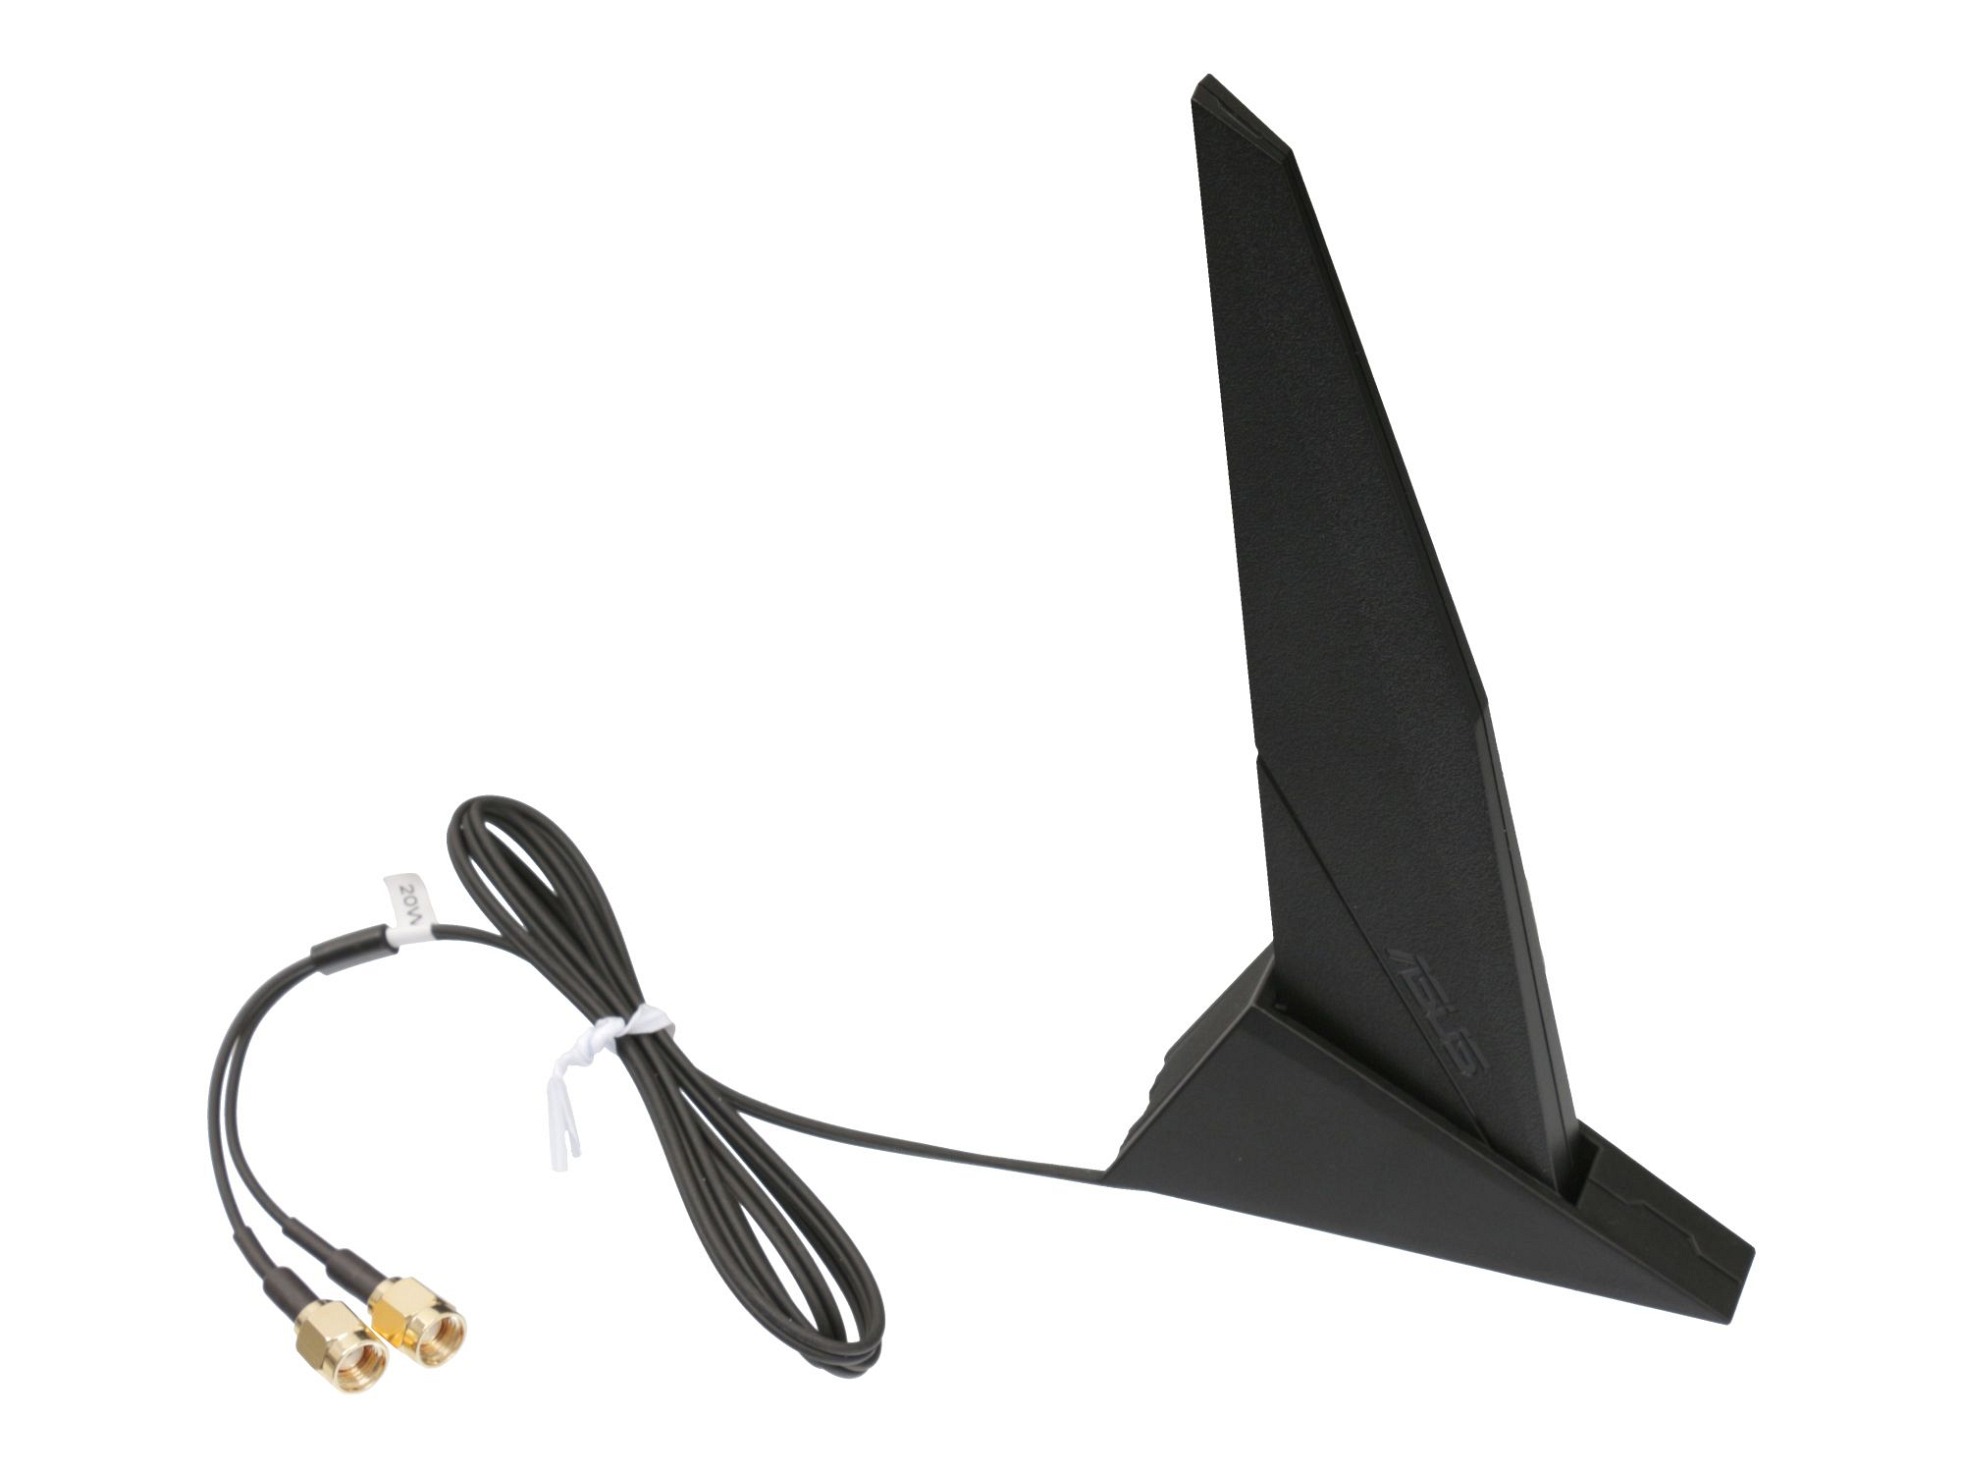 Externe Asus RP-SMA DIPOLE Antenne für Asus TUF GAMING H470-PRO